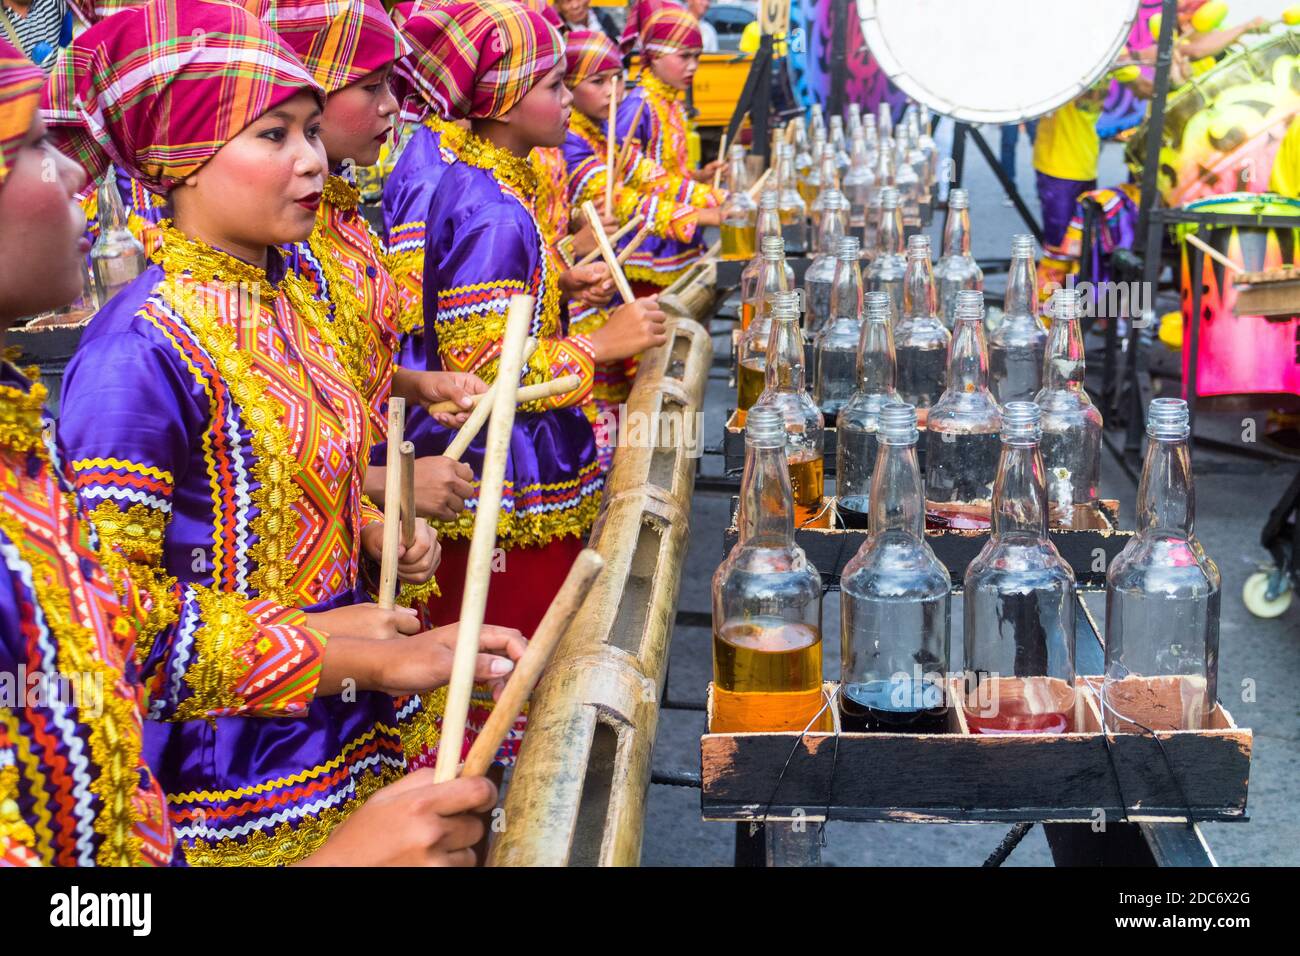 Participants and dancers at the Shariff Kabunsuan Festival in Cotabato City, Philippines Stock Photo